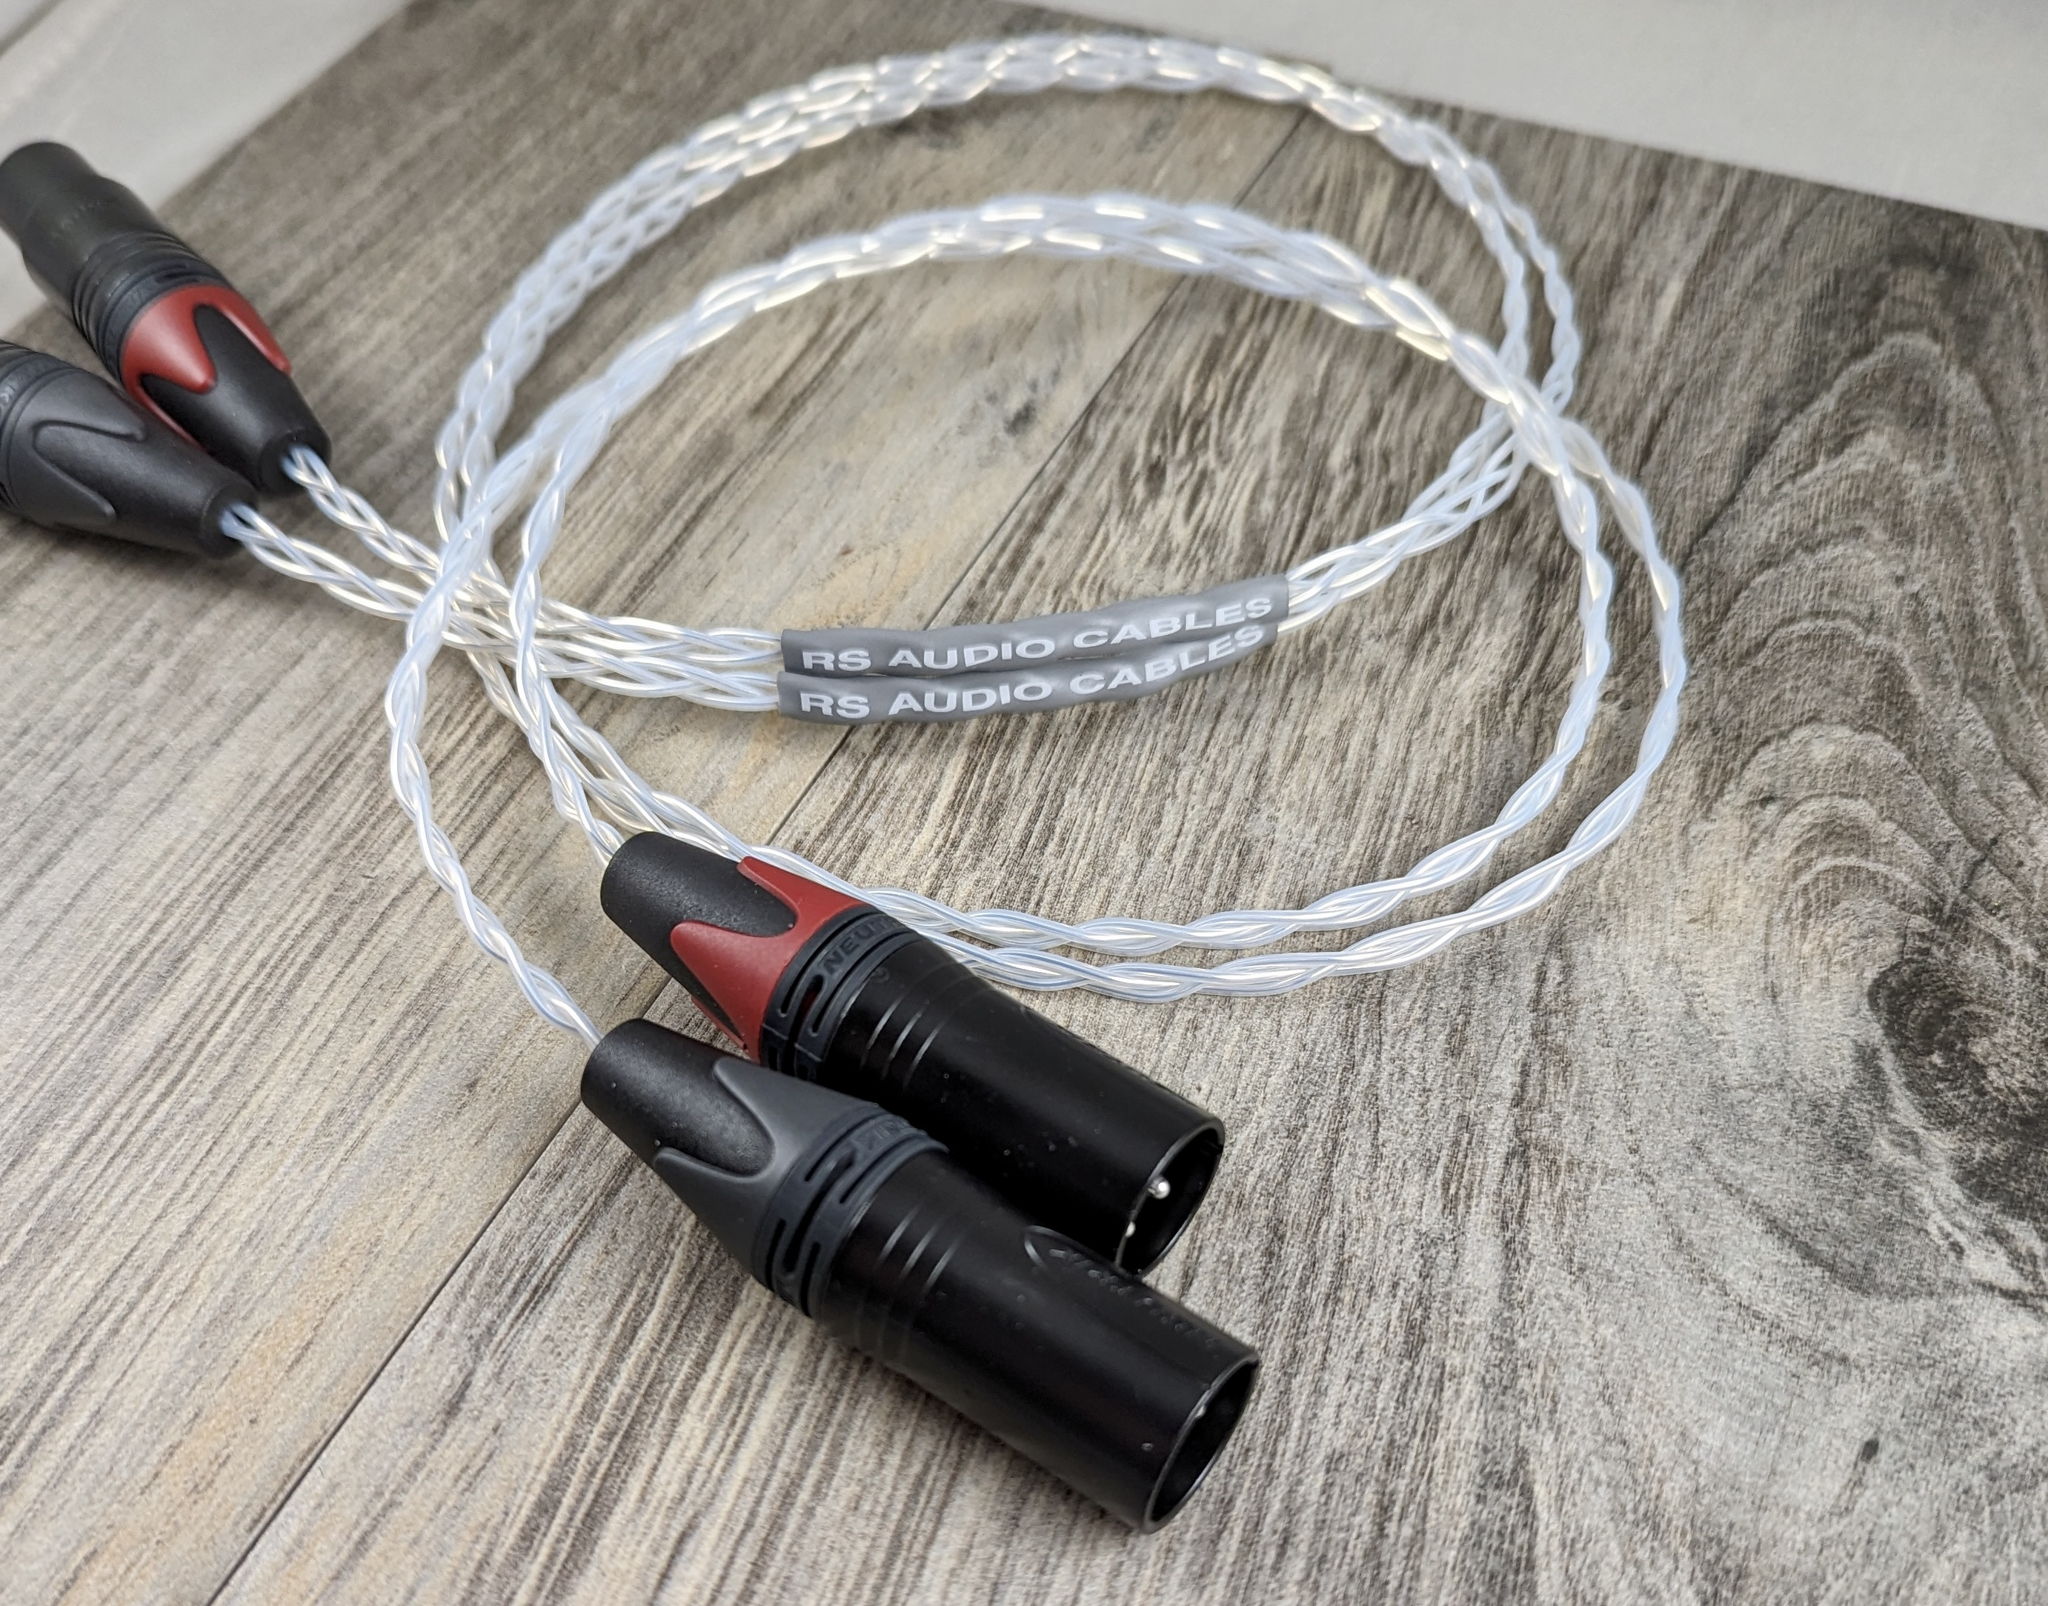 New RS Audio Cables Solid Silver Balanced XLR 1.0m Pair... 2